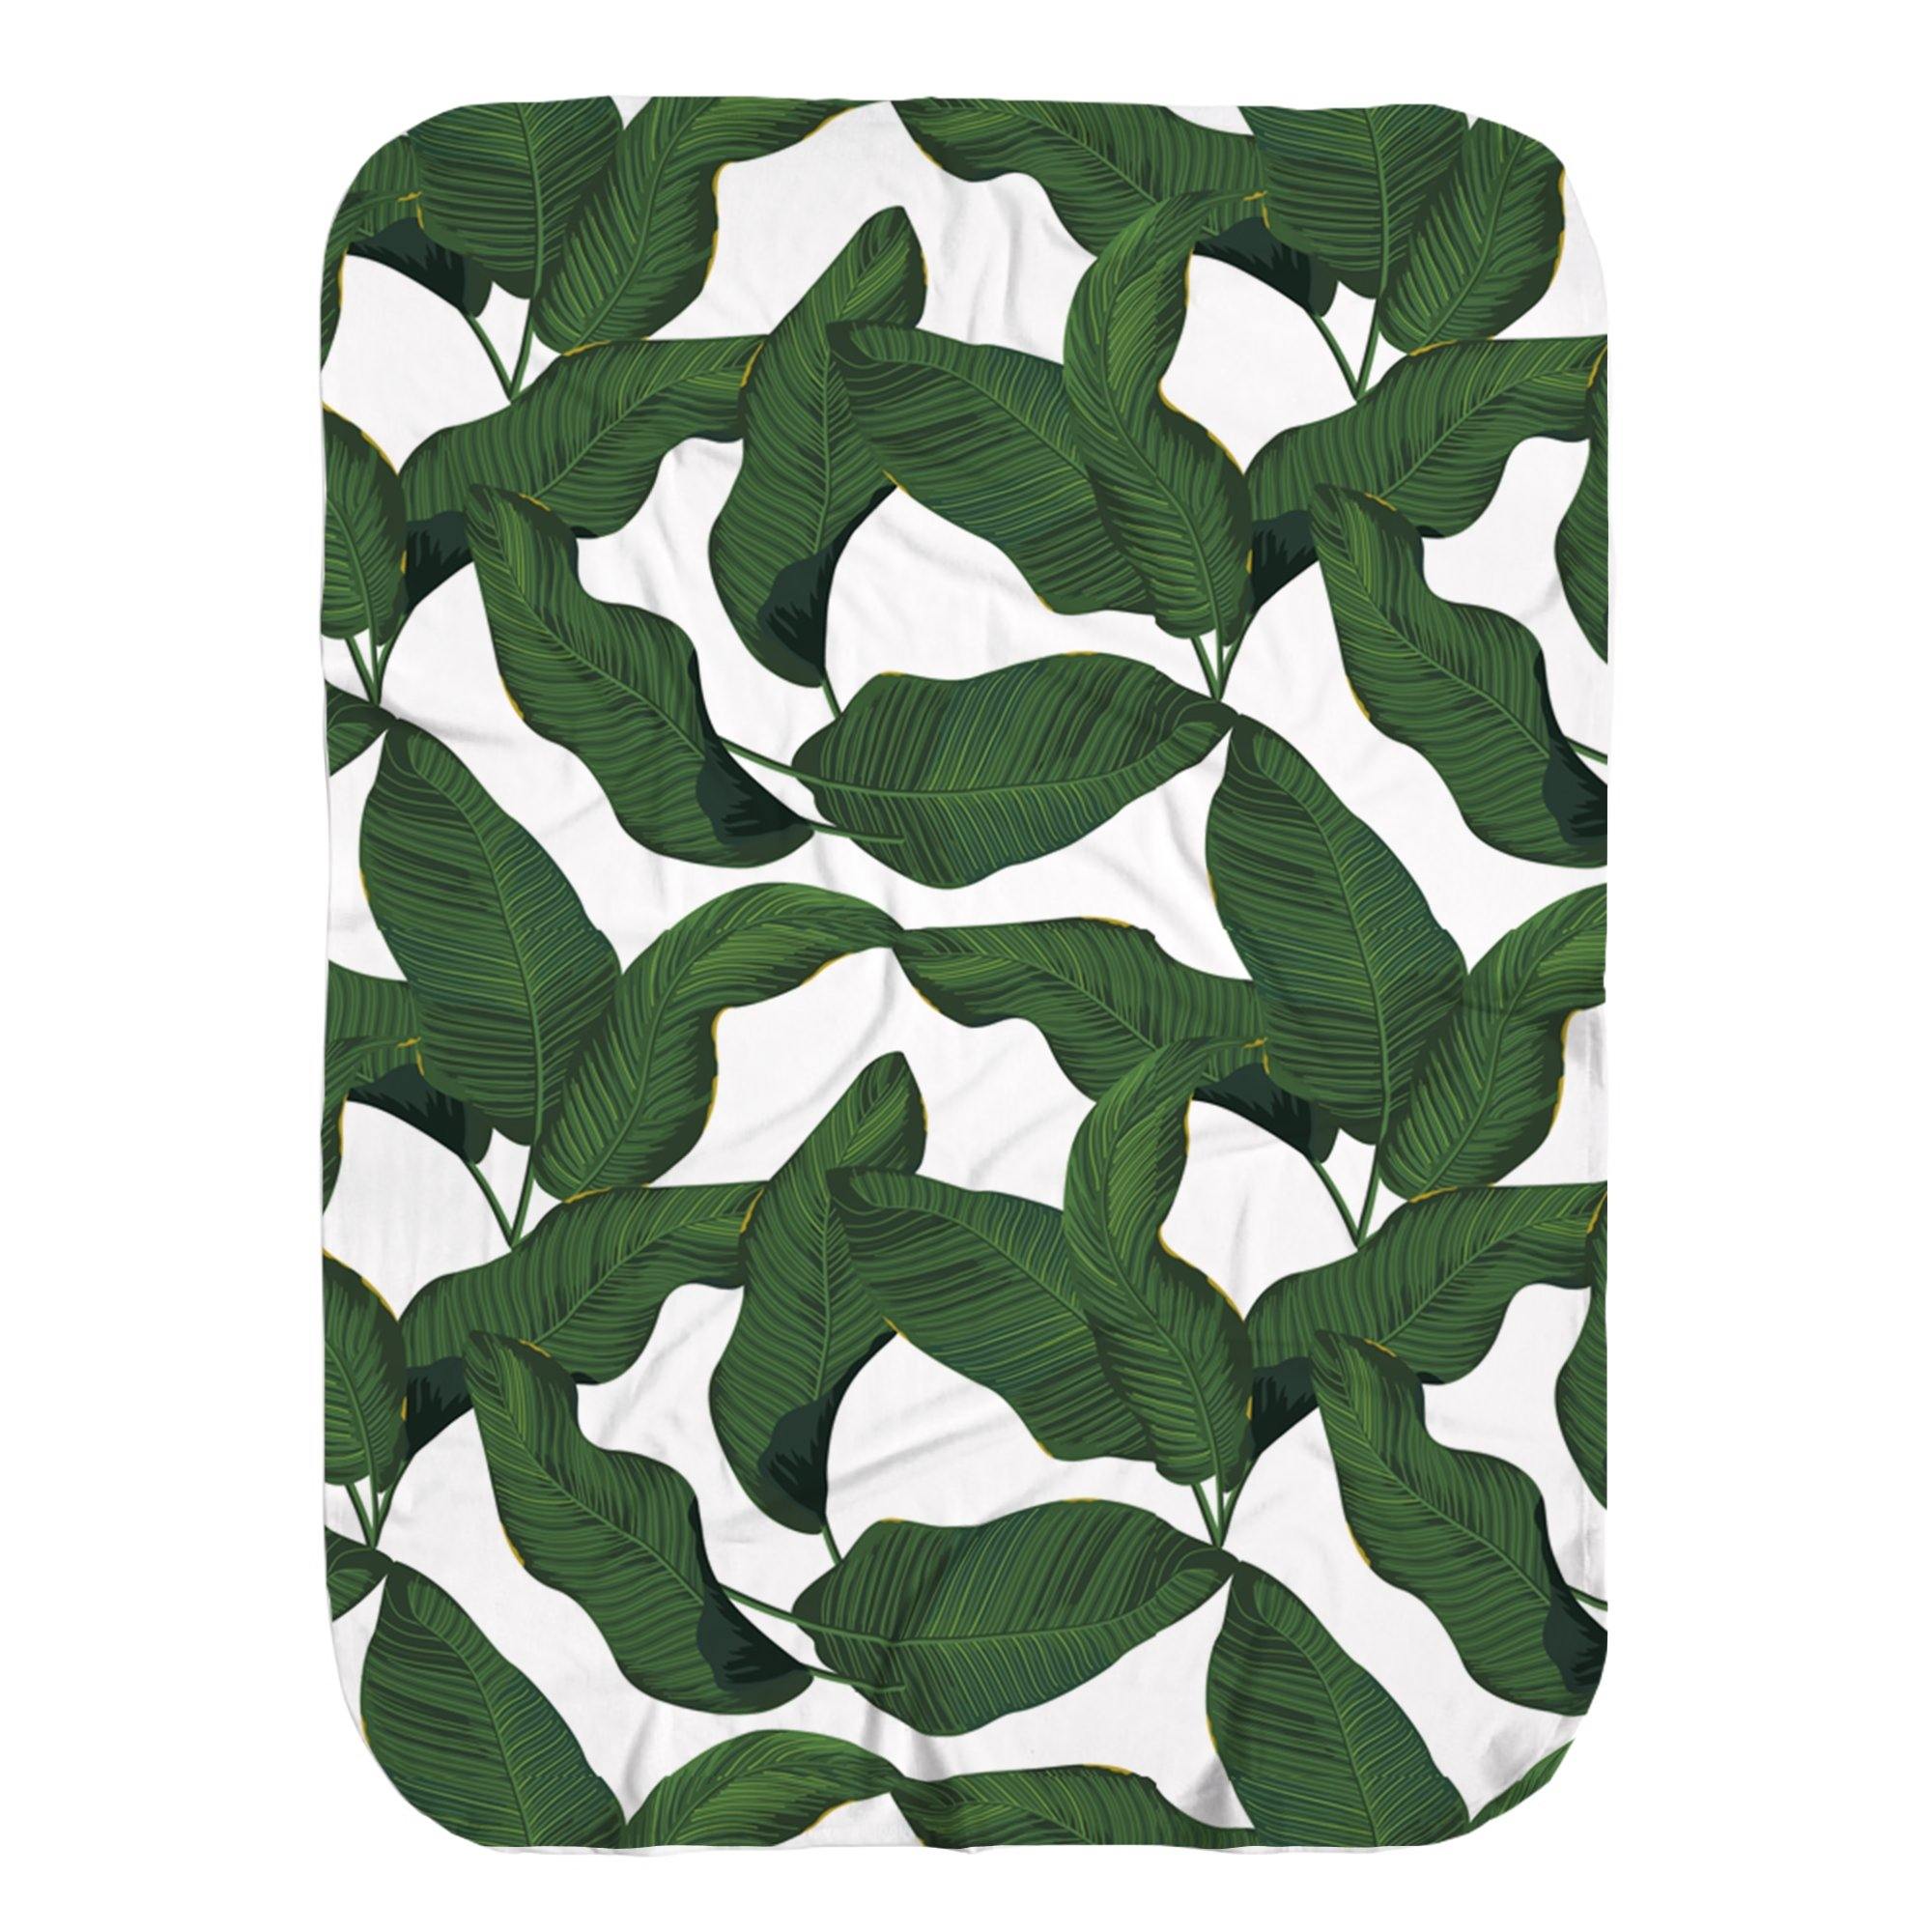 Baby Swaddle Blankets in Jungle Prints (Pack of 3)